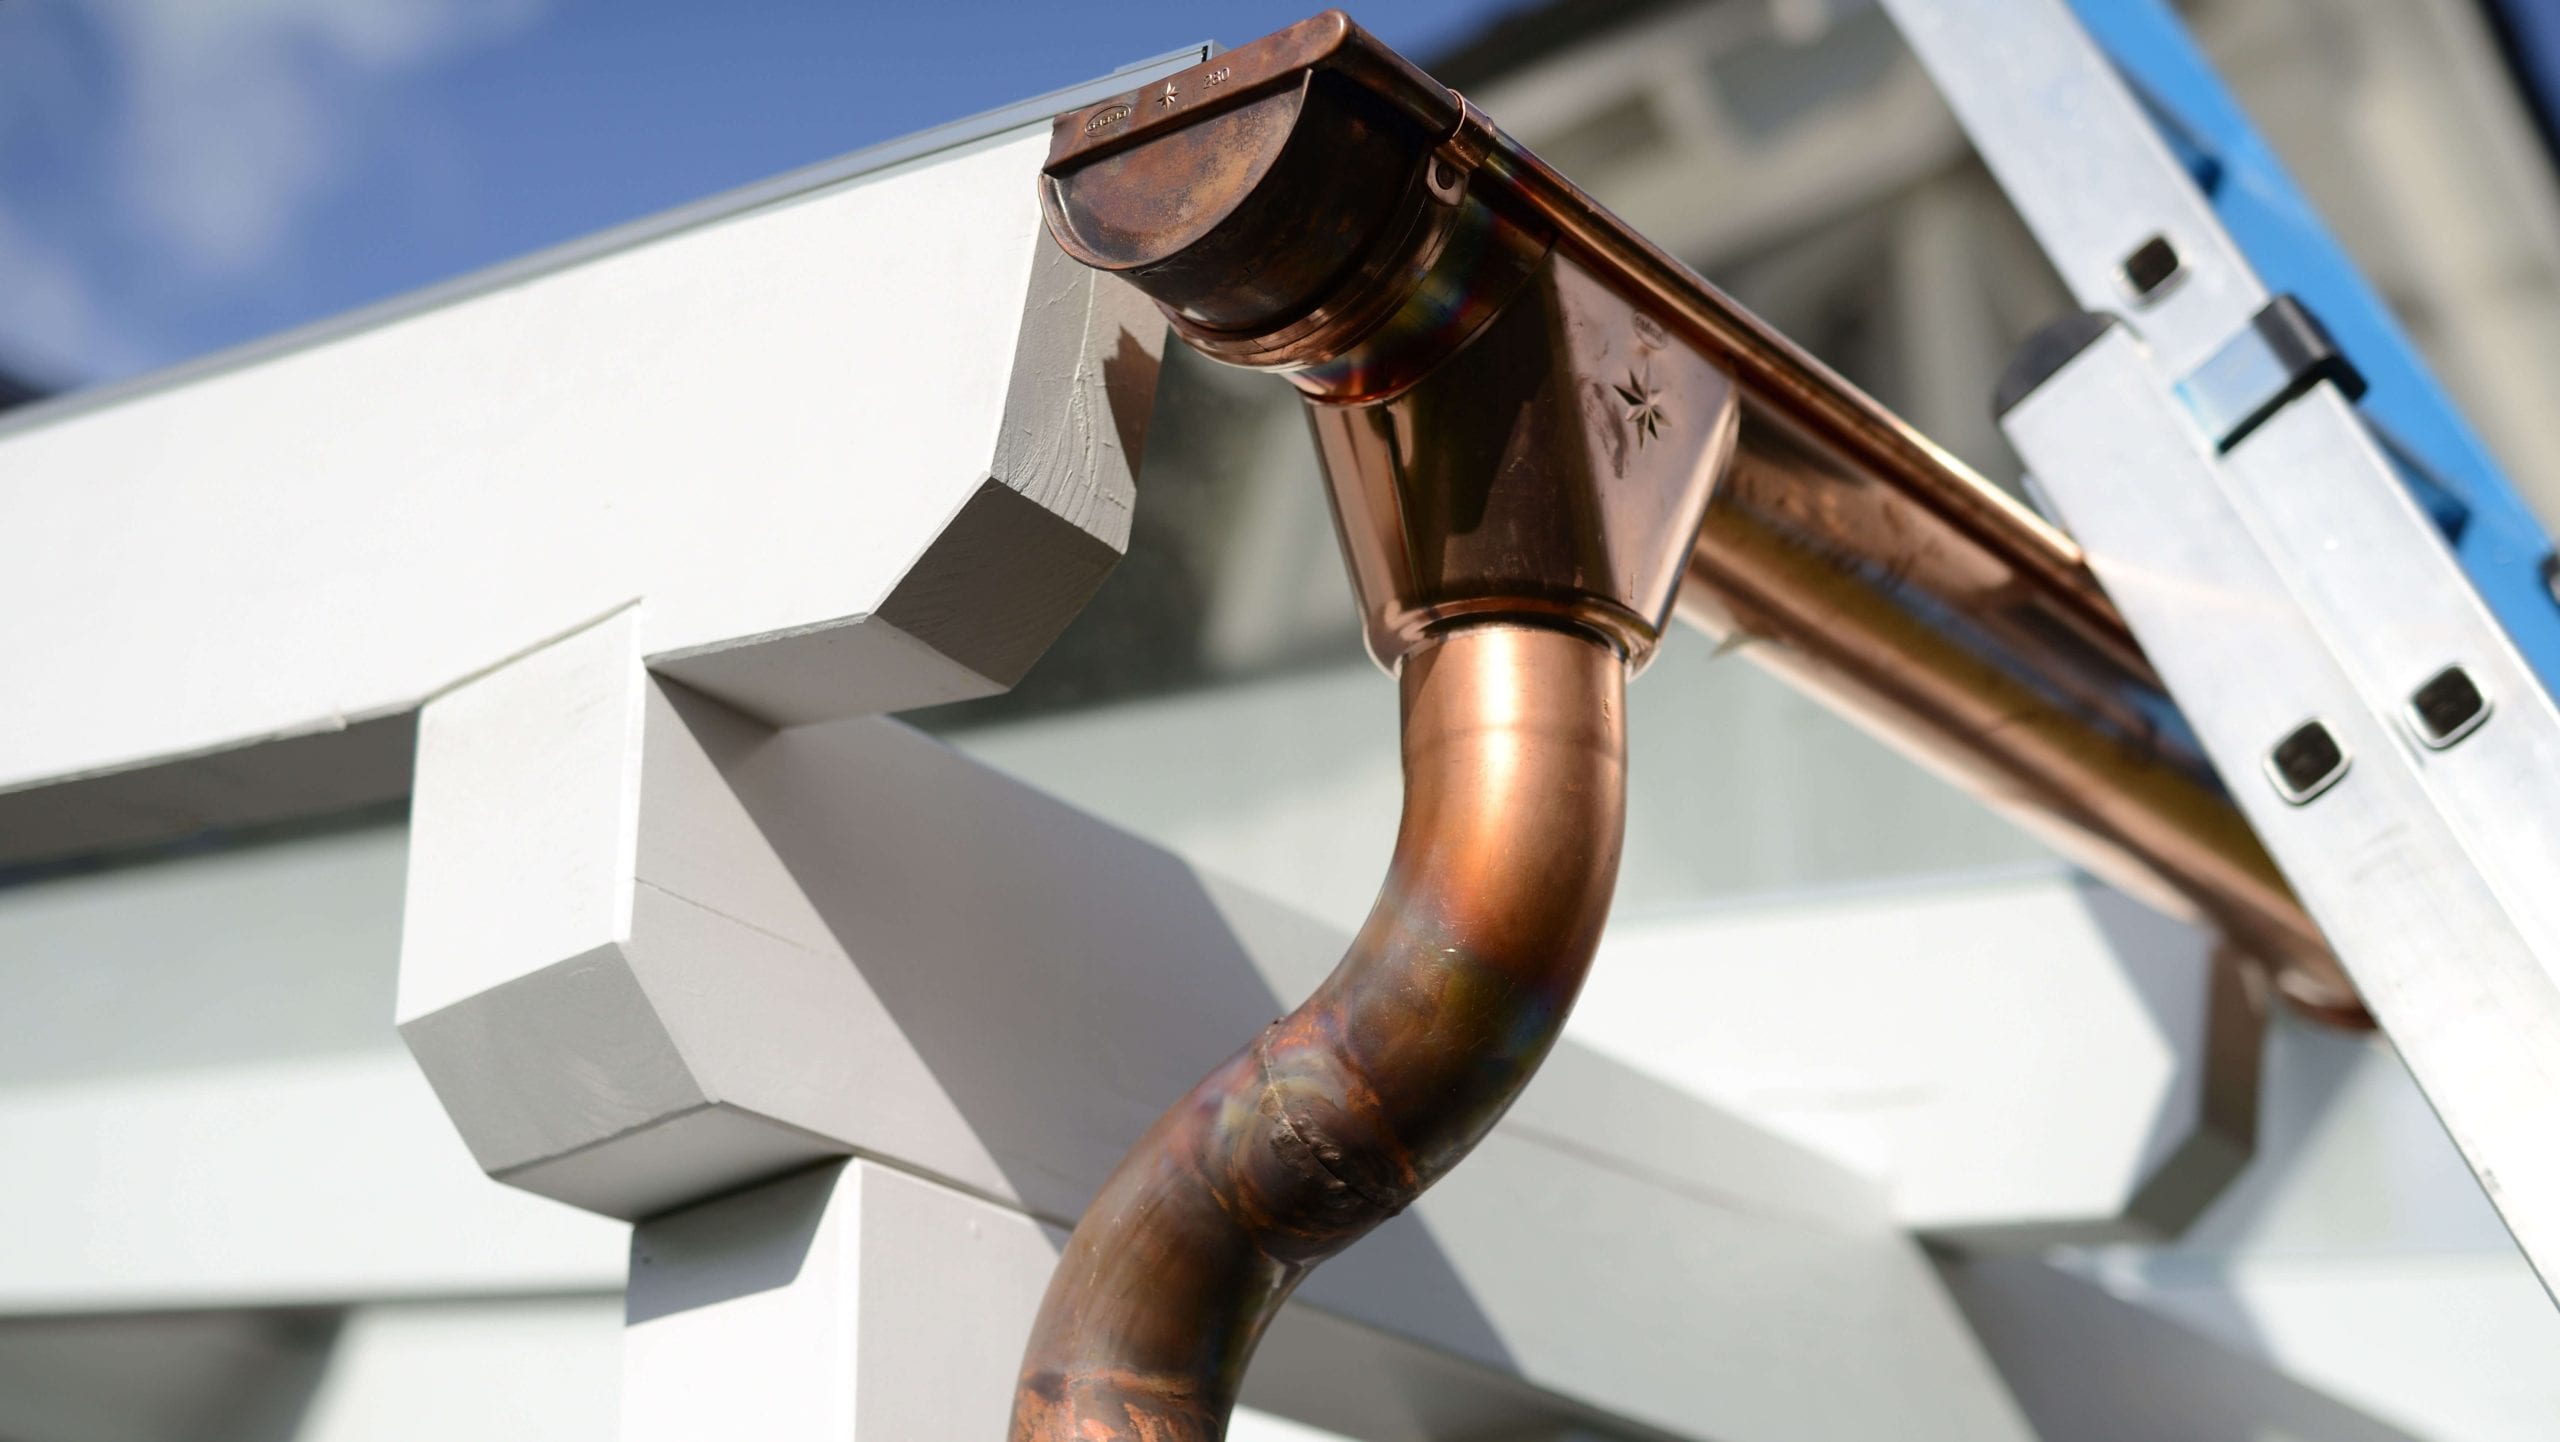 Make your property stand out with copper gutters. Contact for gutter installation in Charleston